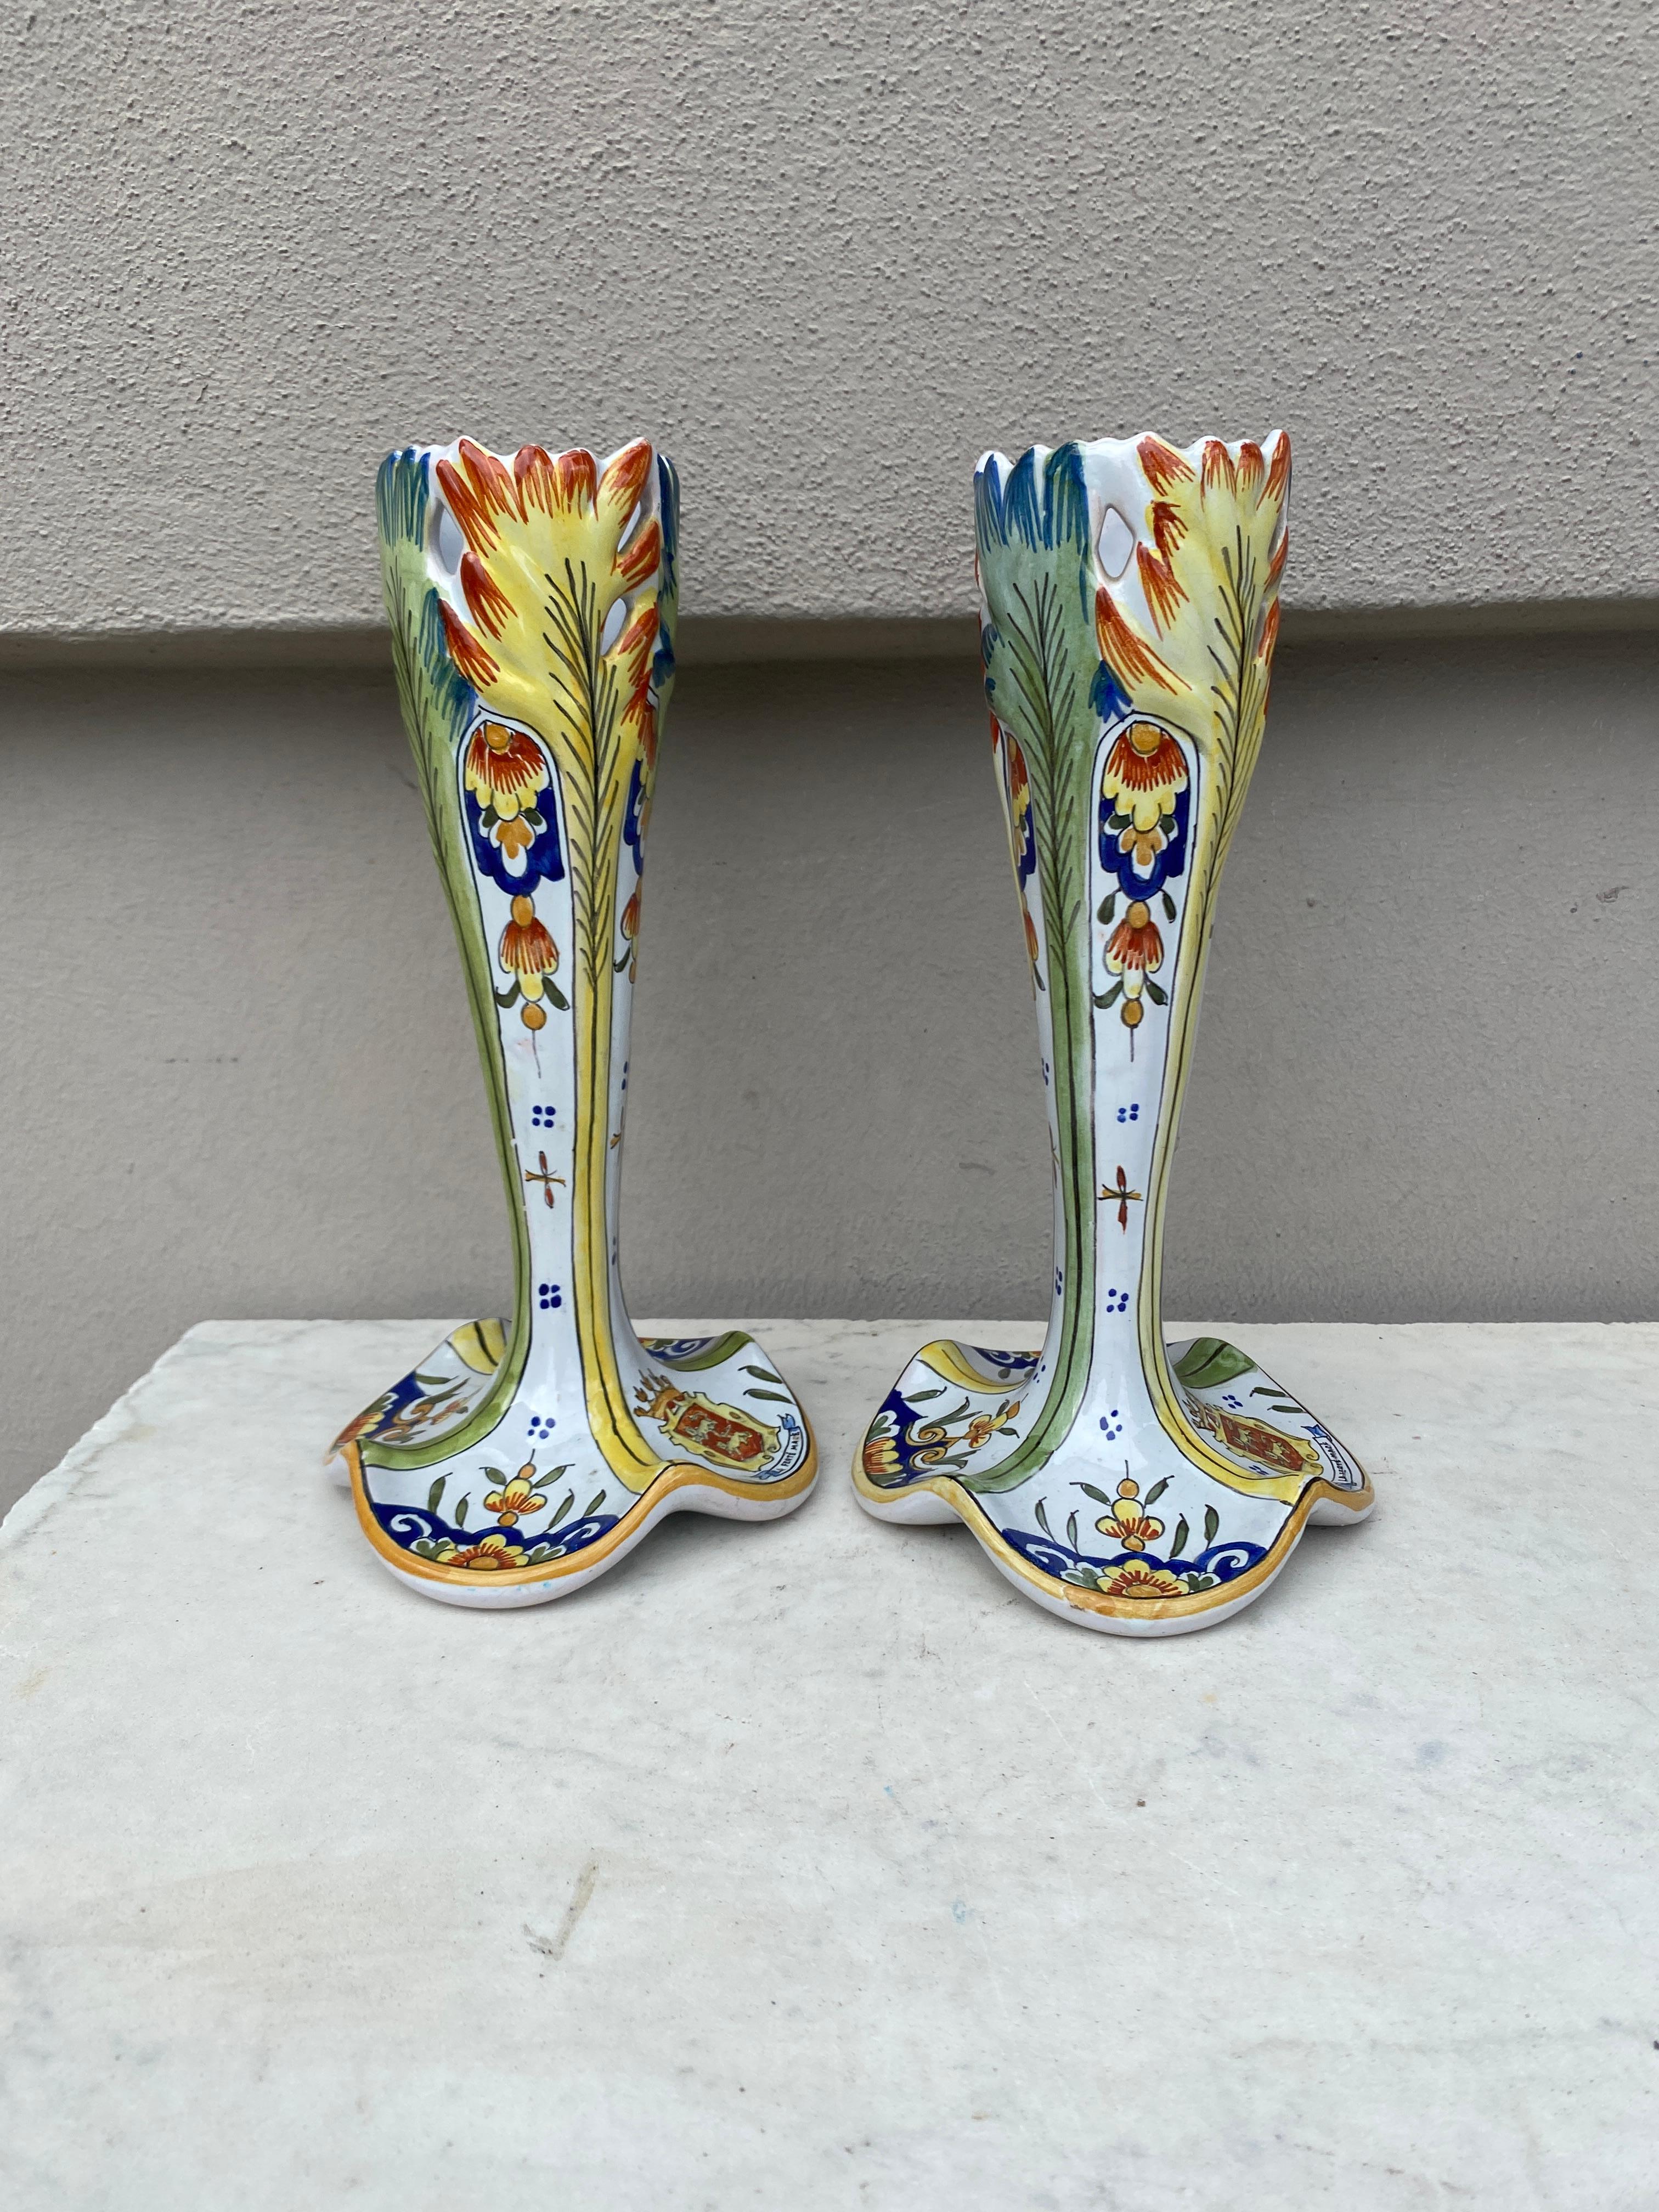 Pair of French Faience Vases Circa 1900.
Decorated with leaves on the top , coat of arms on the base.